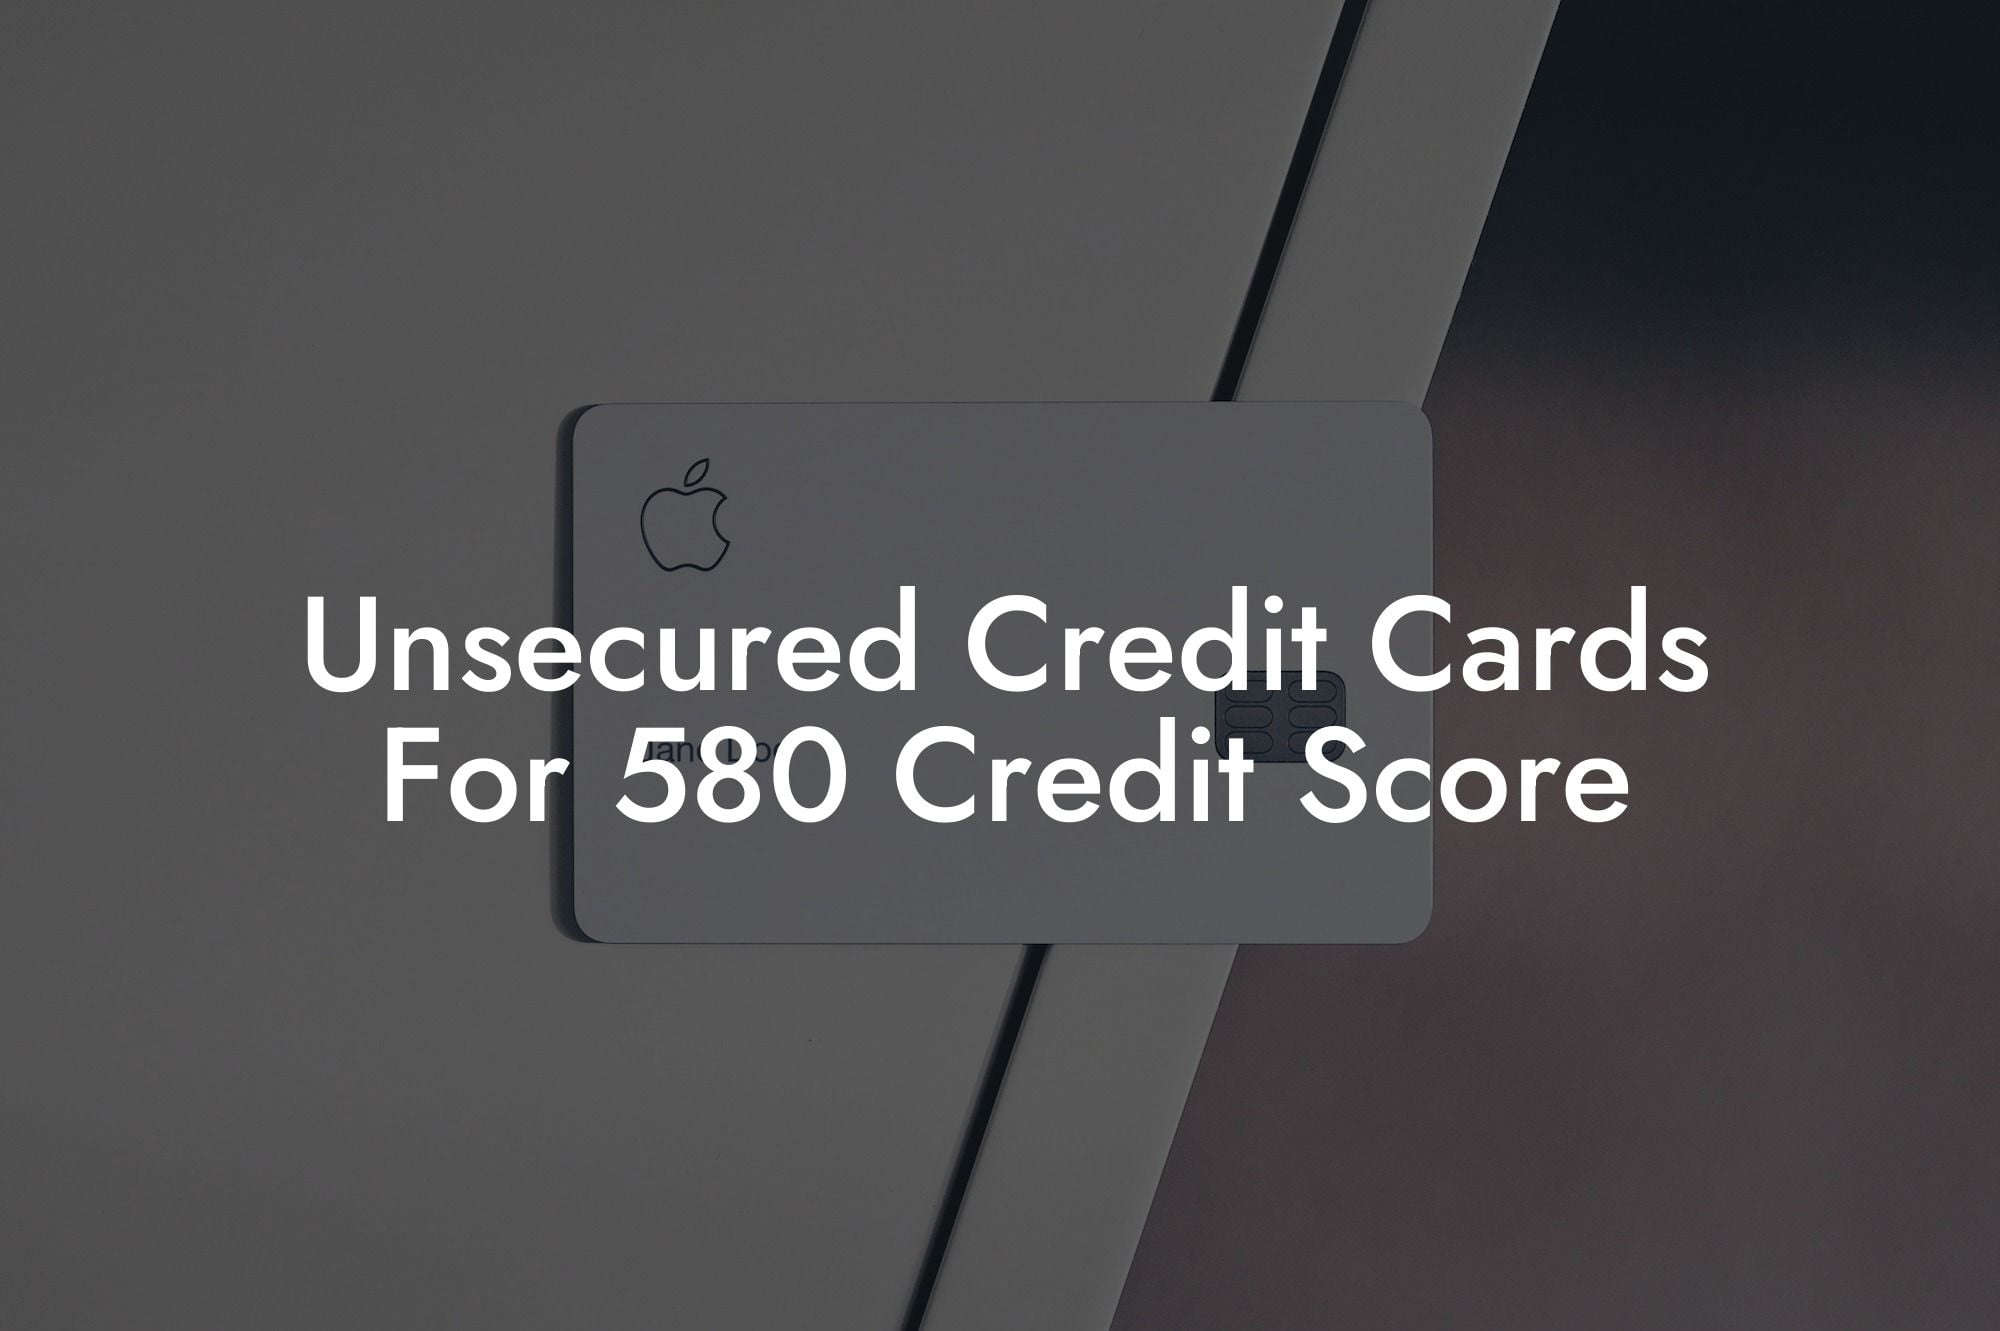 Unsecured Credit Cards For 580 Credit Score